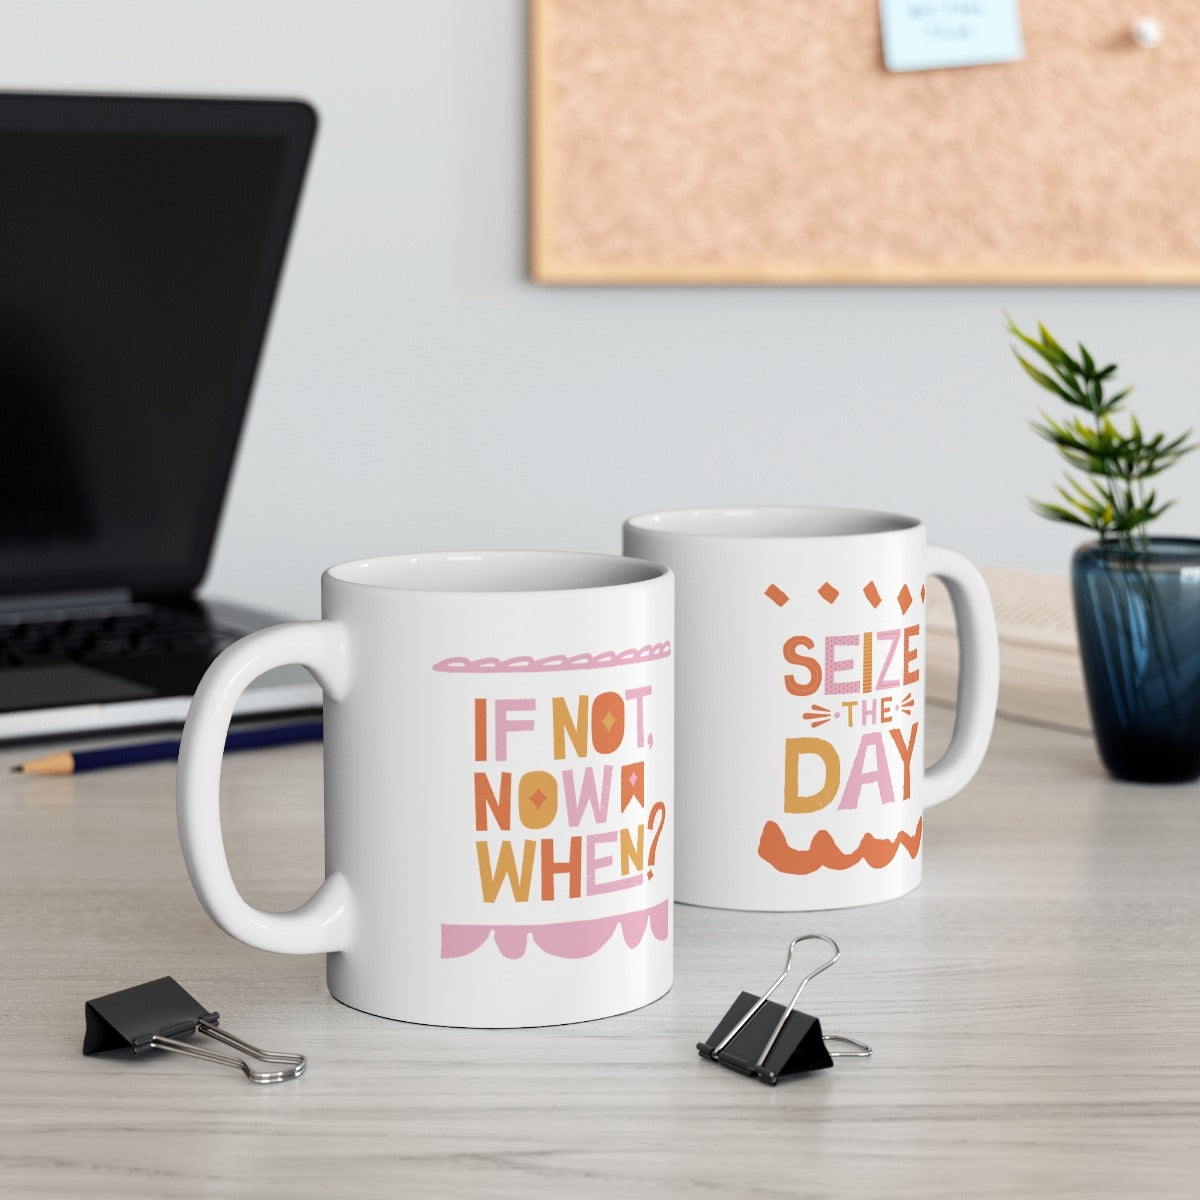 Seize The Day Mugs Set of Two